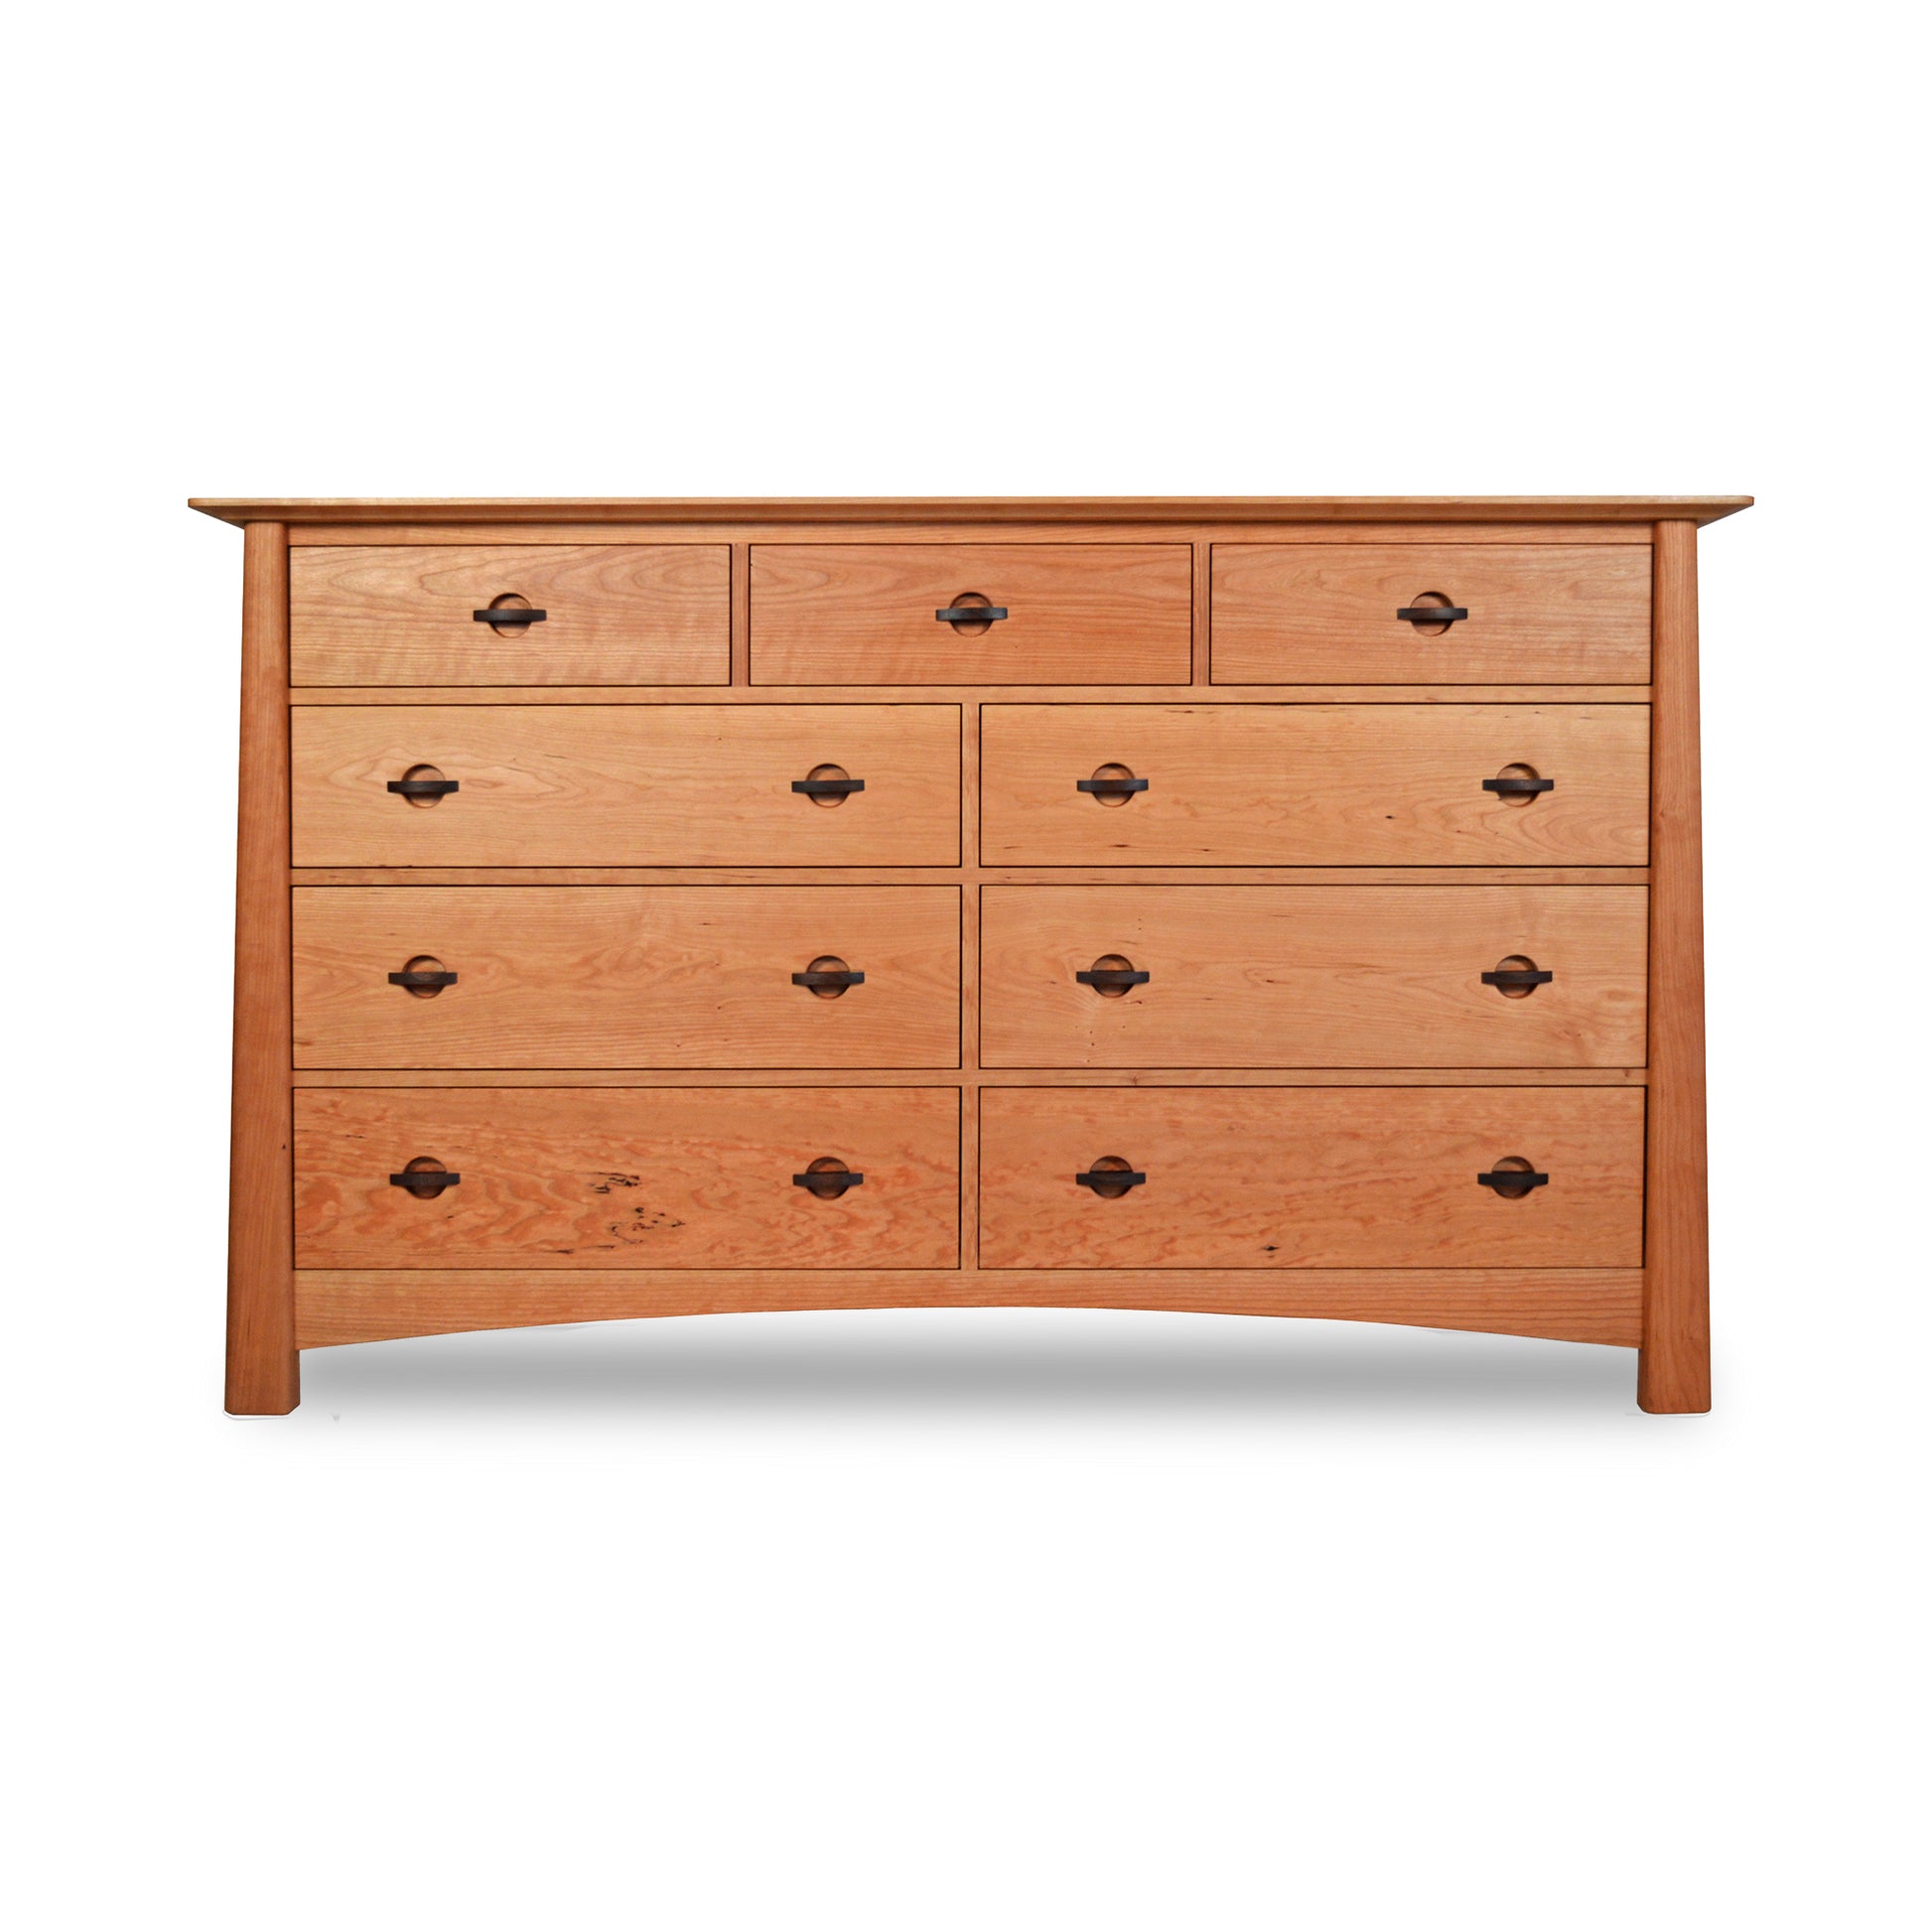 A handmade Cherry Moon 9-Drawer Dresser by Maple Corner Woodworks, featuring a symmetrical layout with three smaller drawers across the top and six larger drawers below, all with round handles, against a white background.